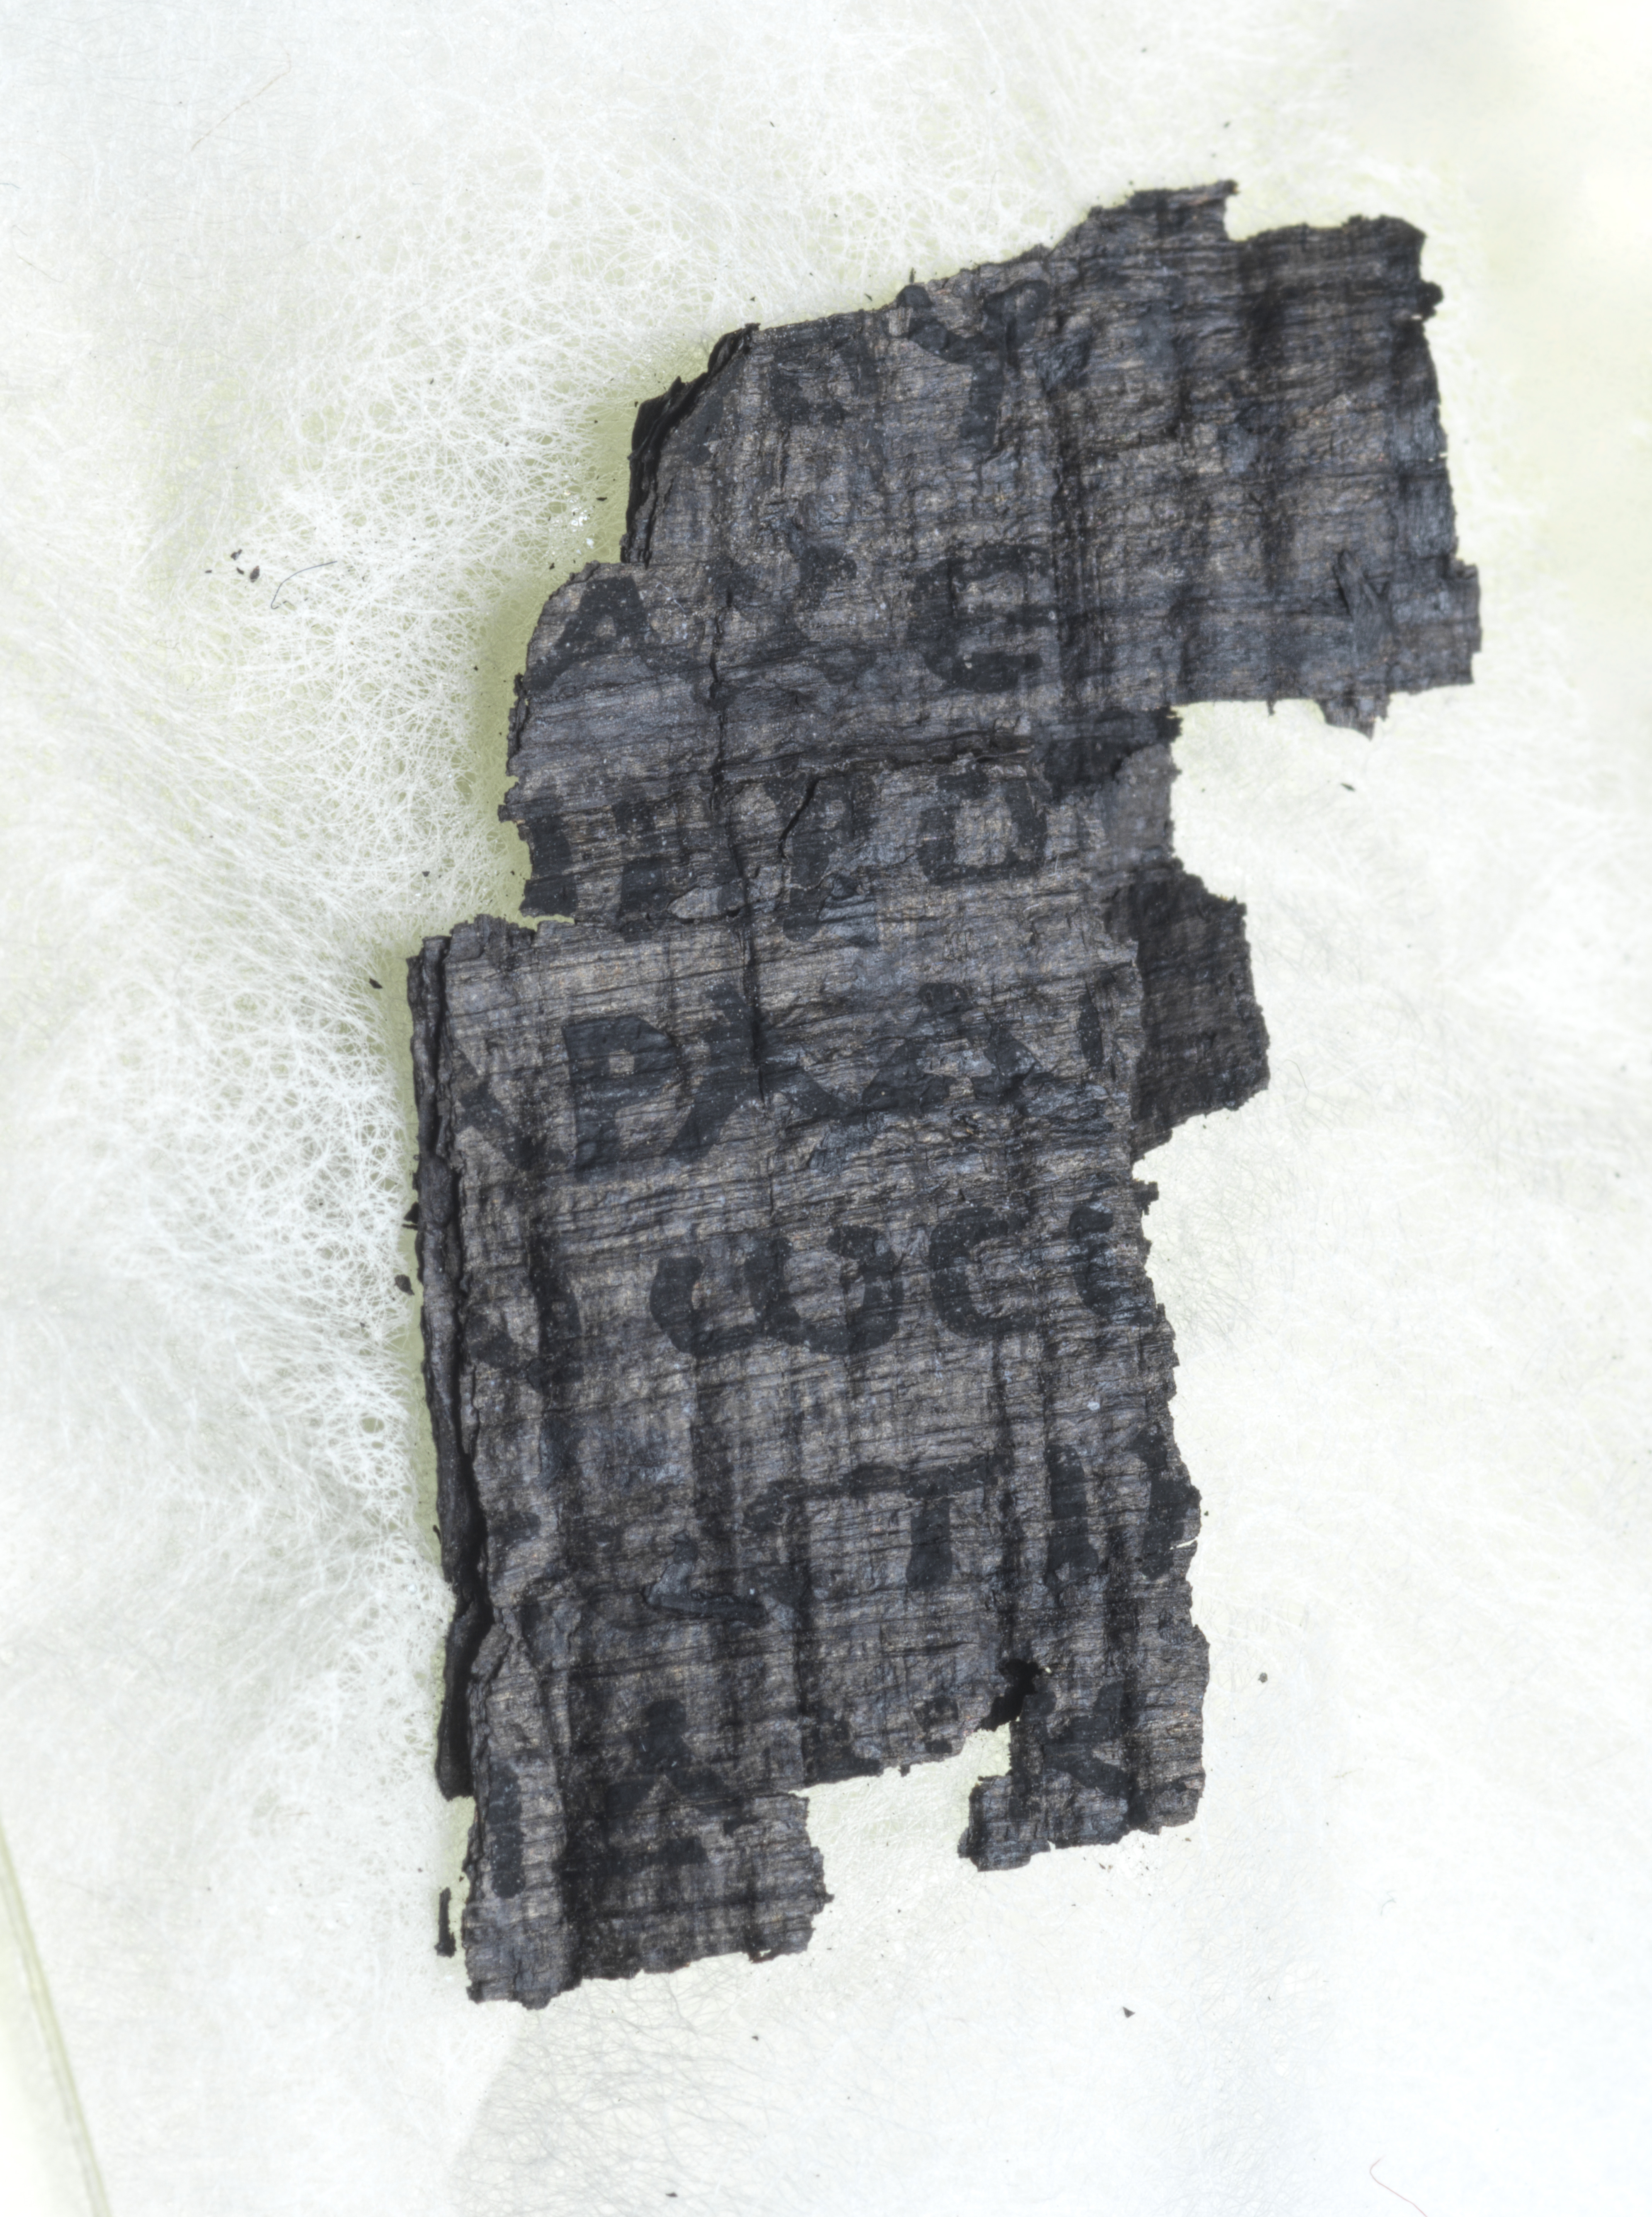 Herculaneum Scroll fragment from Institut de France being scanned at Diamond Light Source 